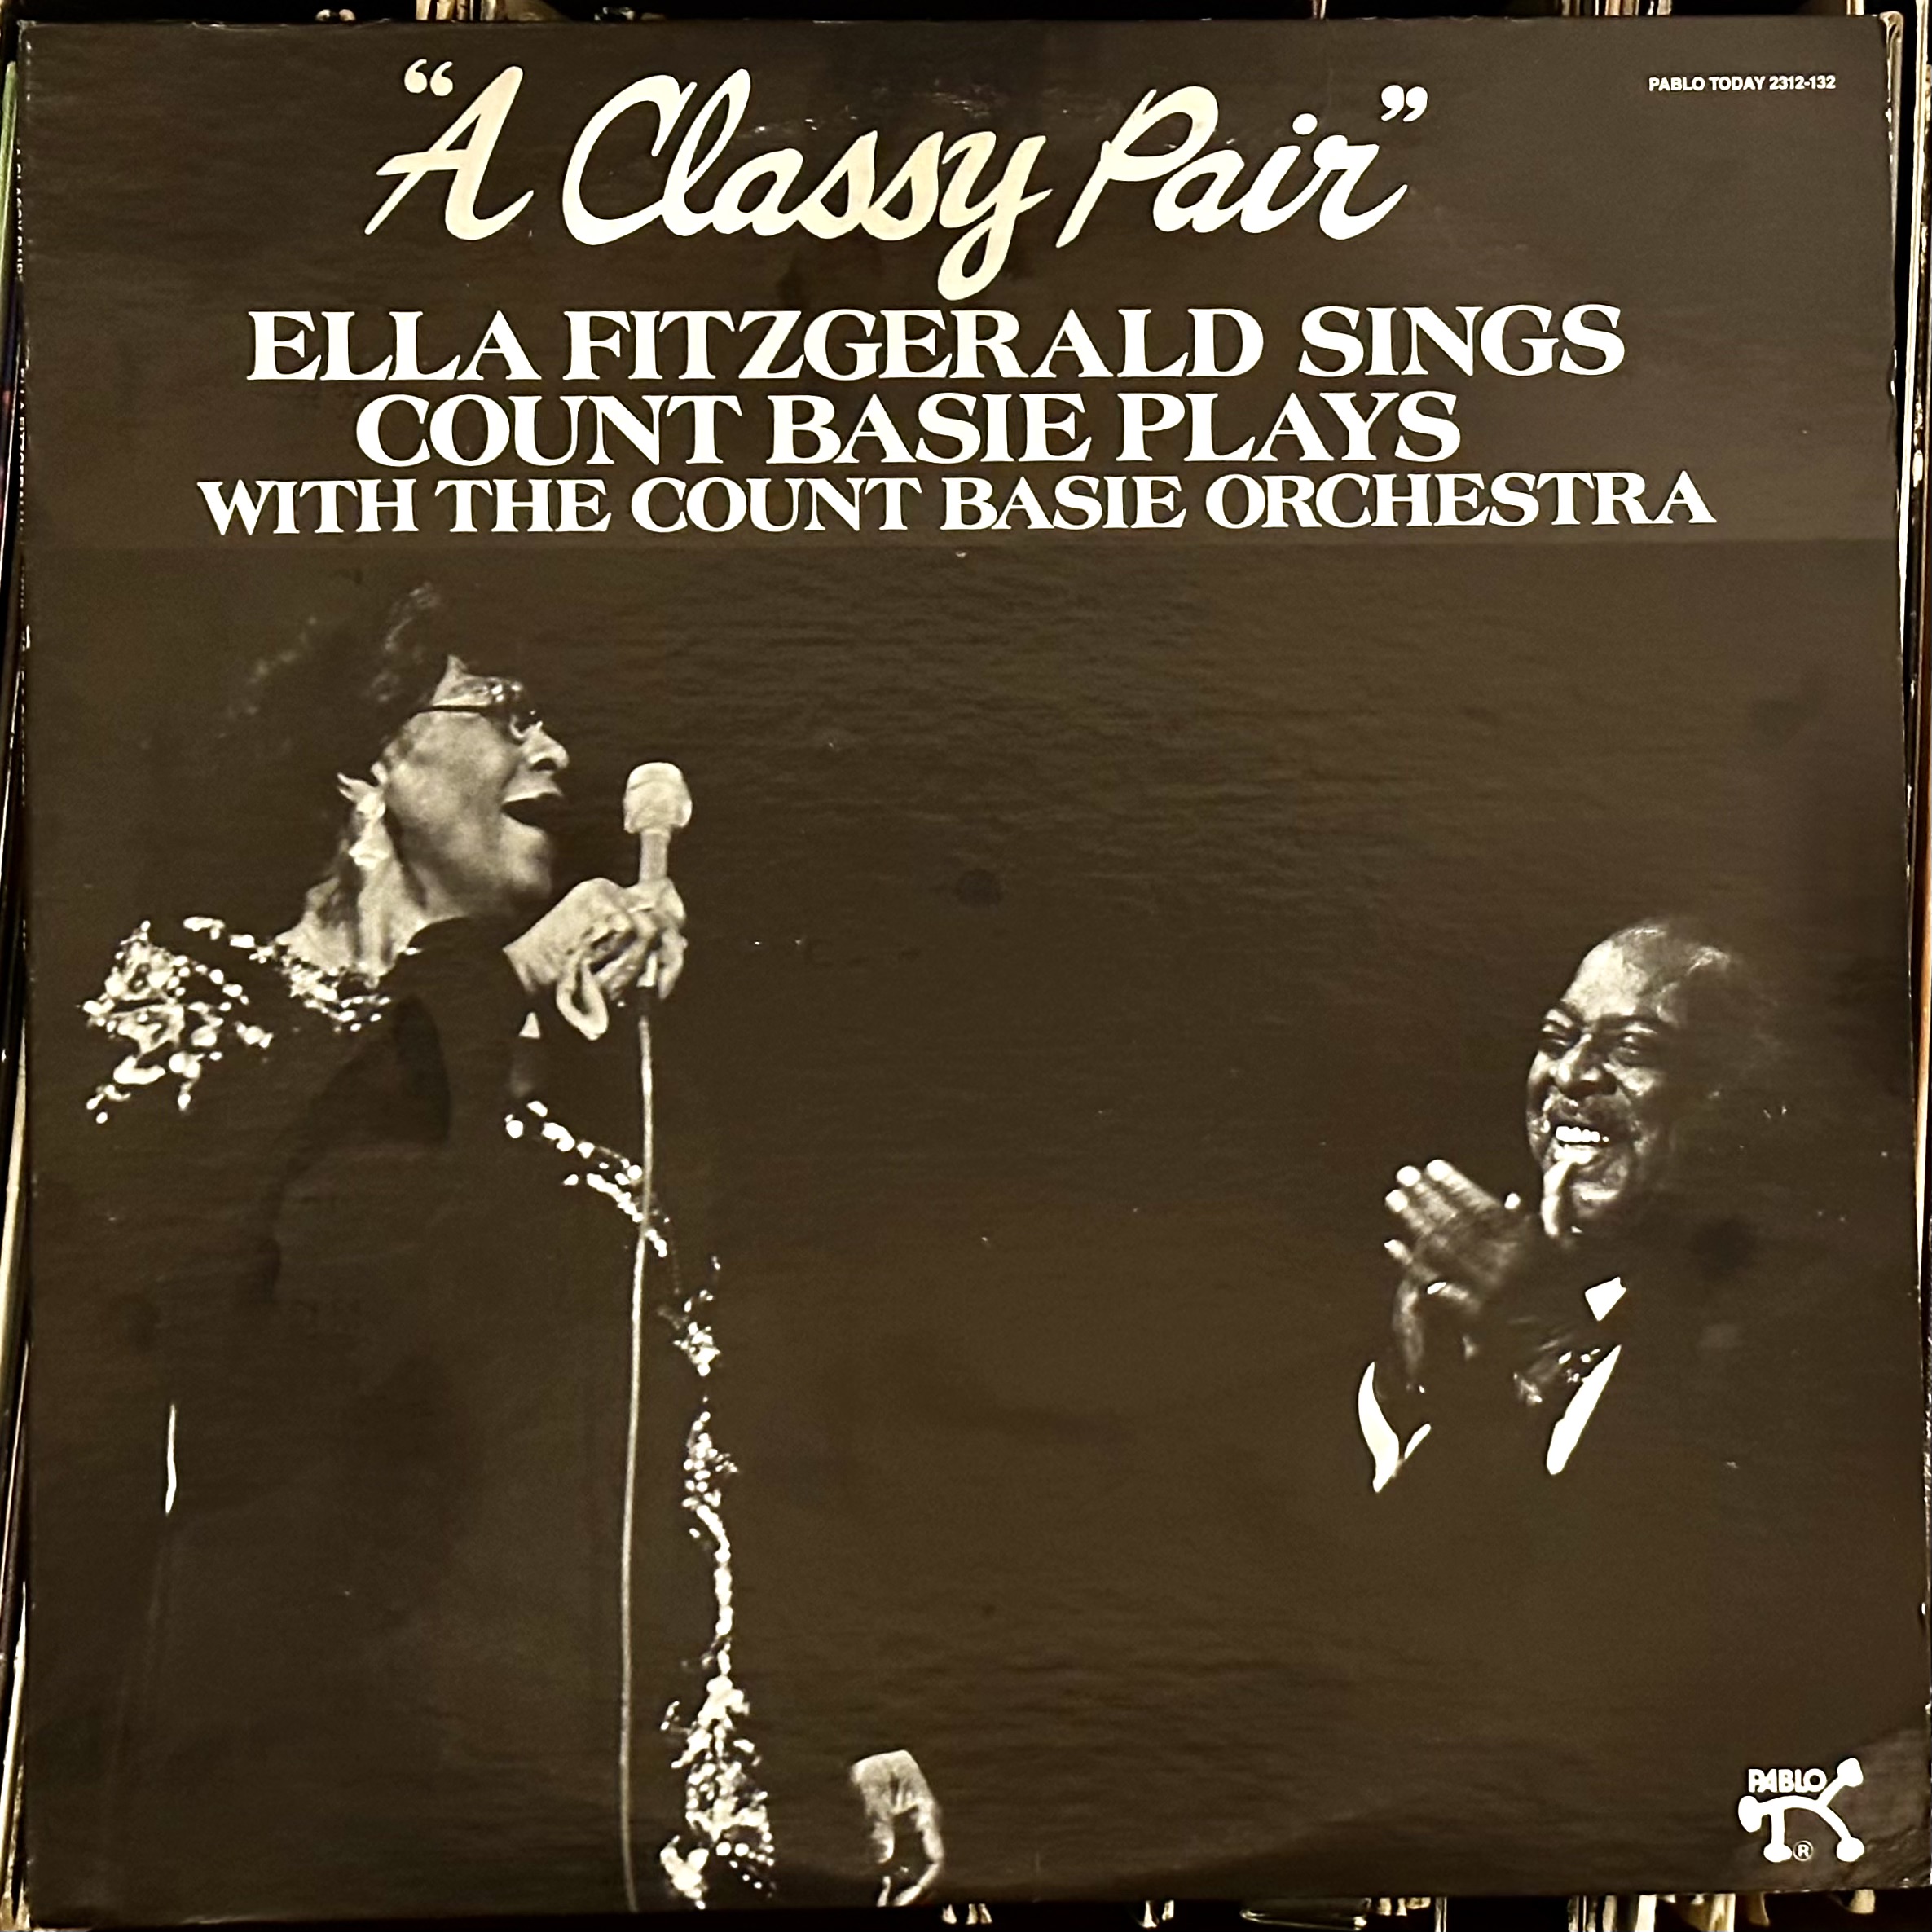 A Classy Pair by Ella Fitzgerald and the Count Basie Orchestra